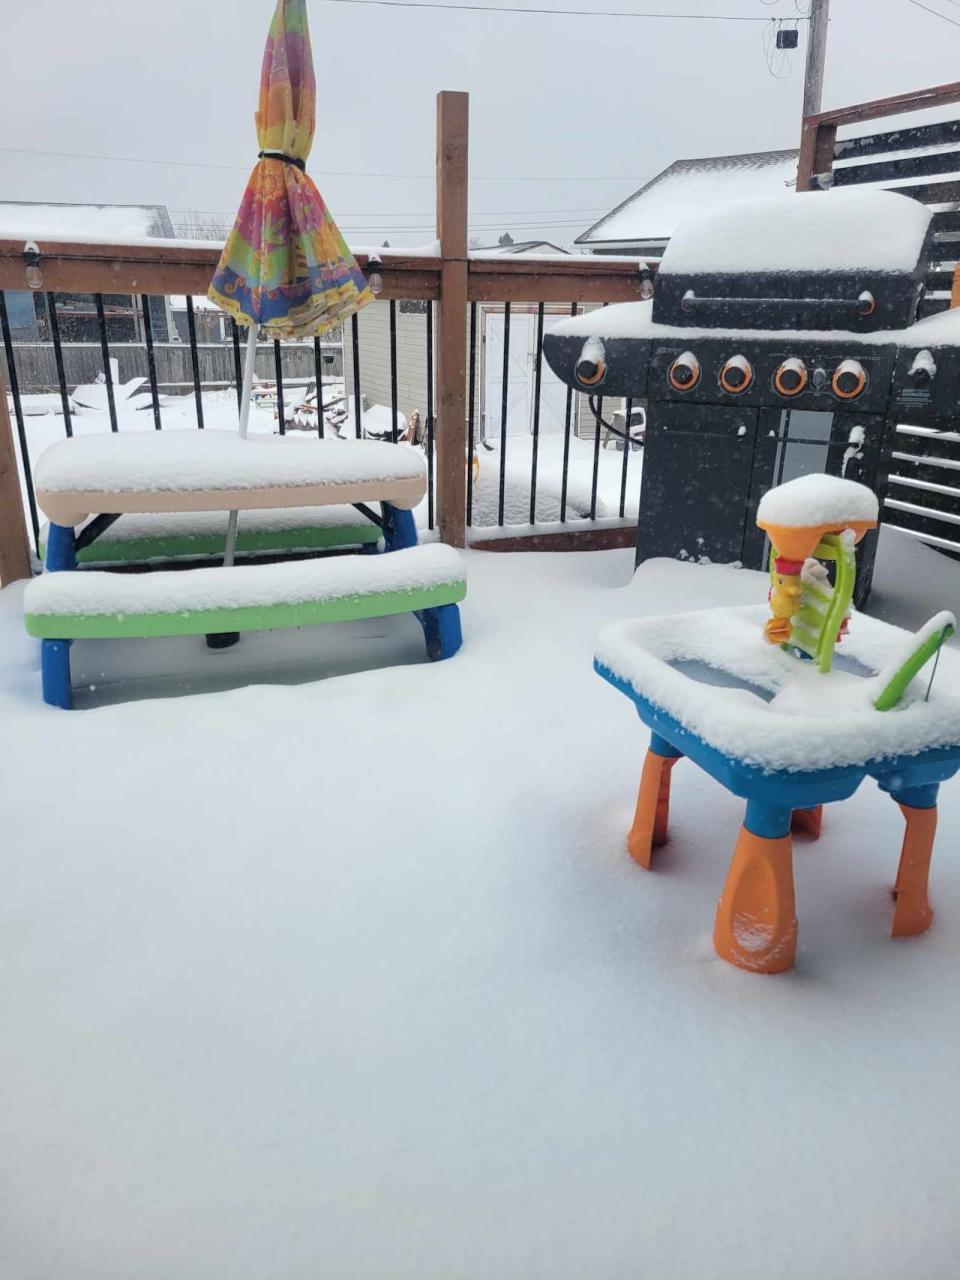 People in Labrador City and Wabush woke up Thursday to more snow than they likely would want for late May.